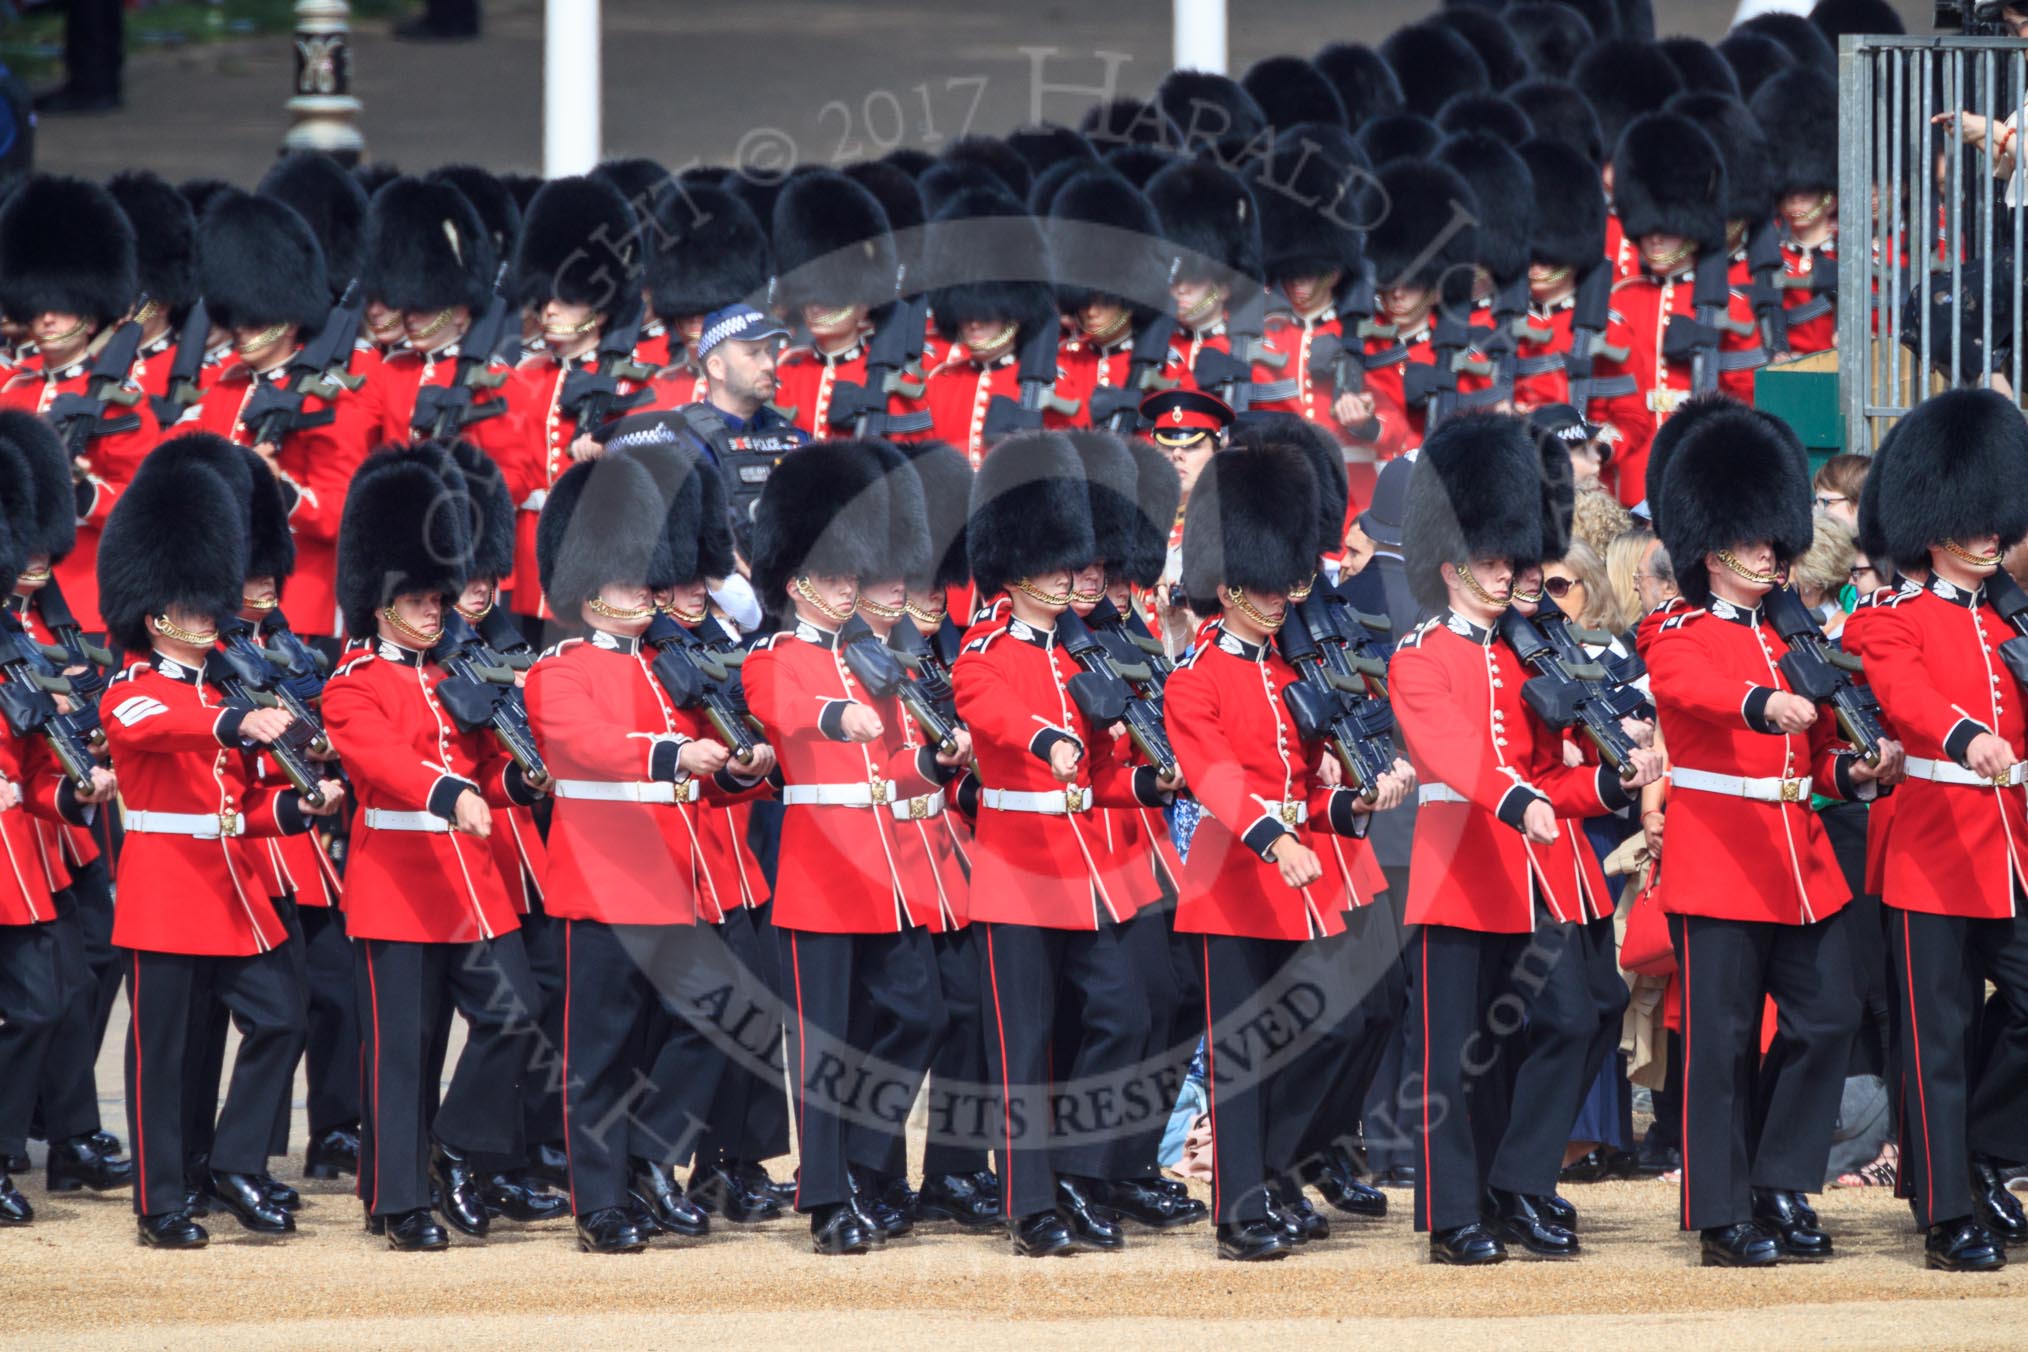 Number Six Guard, F Company, Scots Guards arrives first on Horse Guards Parade during Trooping the Colour 2018 followed bt Number Five Guard, Nijmegen Company, Grenadier Guards, during  The Queen's Birthday Parade at Horse Guards Parade, Westminster, London, 9 June 2018, 10:25.